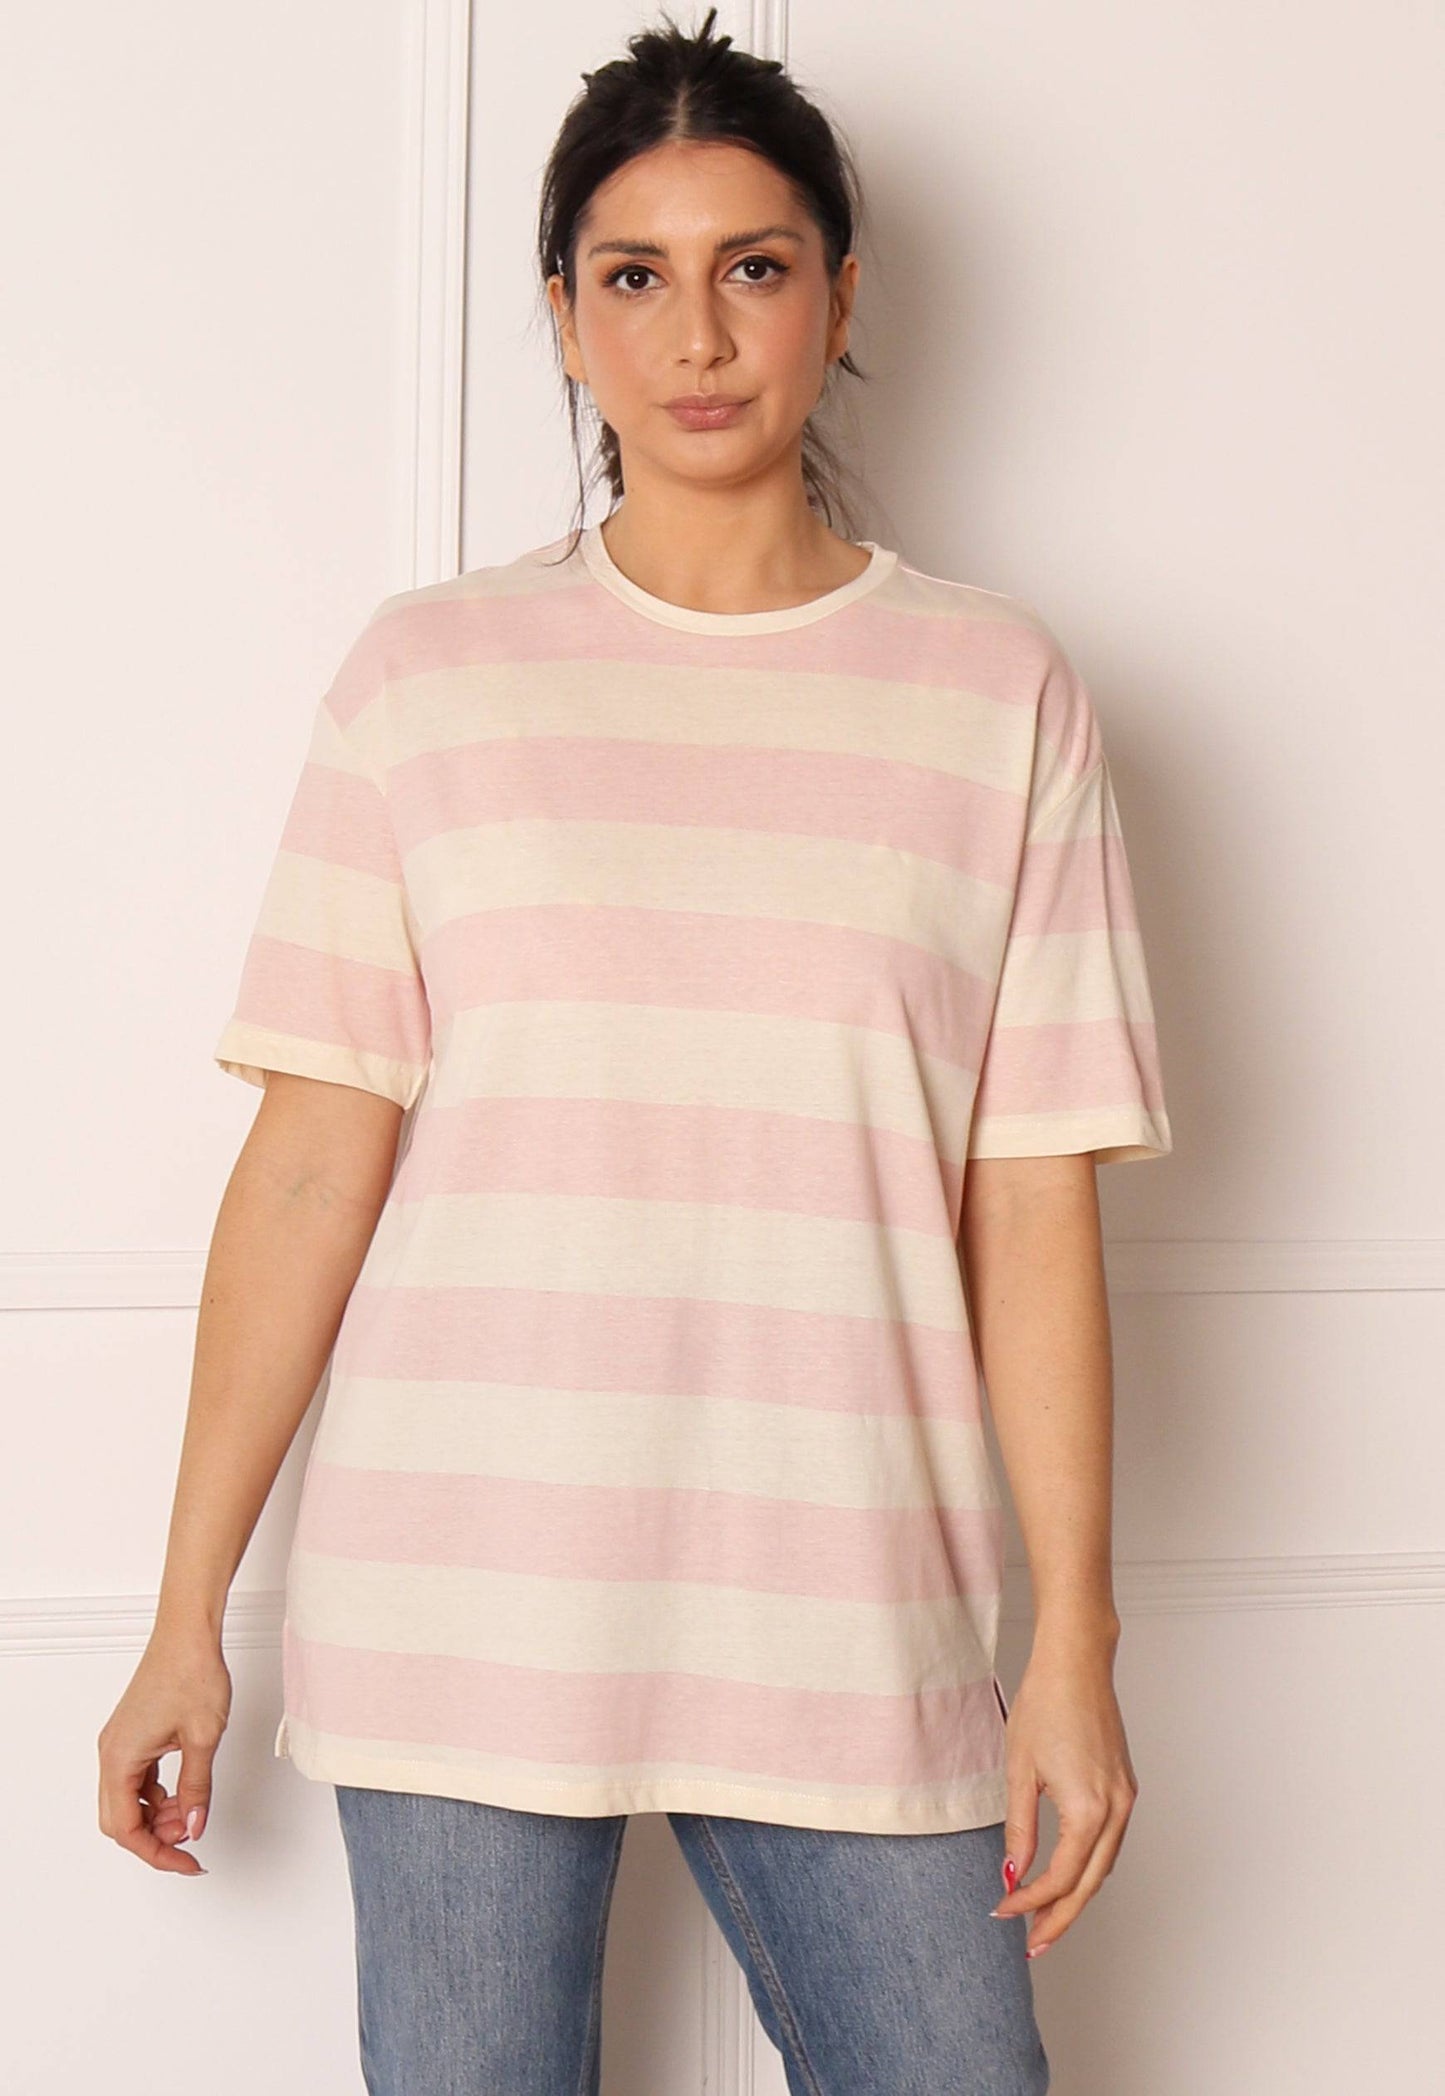 PIECES Wide Stripe Oversized Tee in Pink & Cream - One Nation Clothing